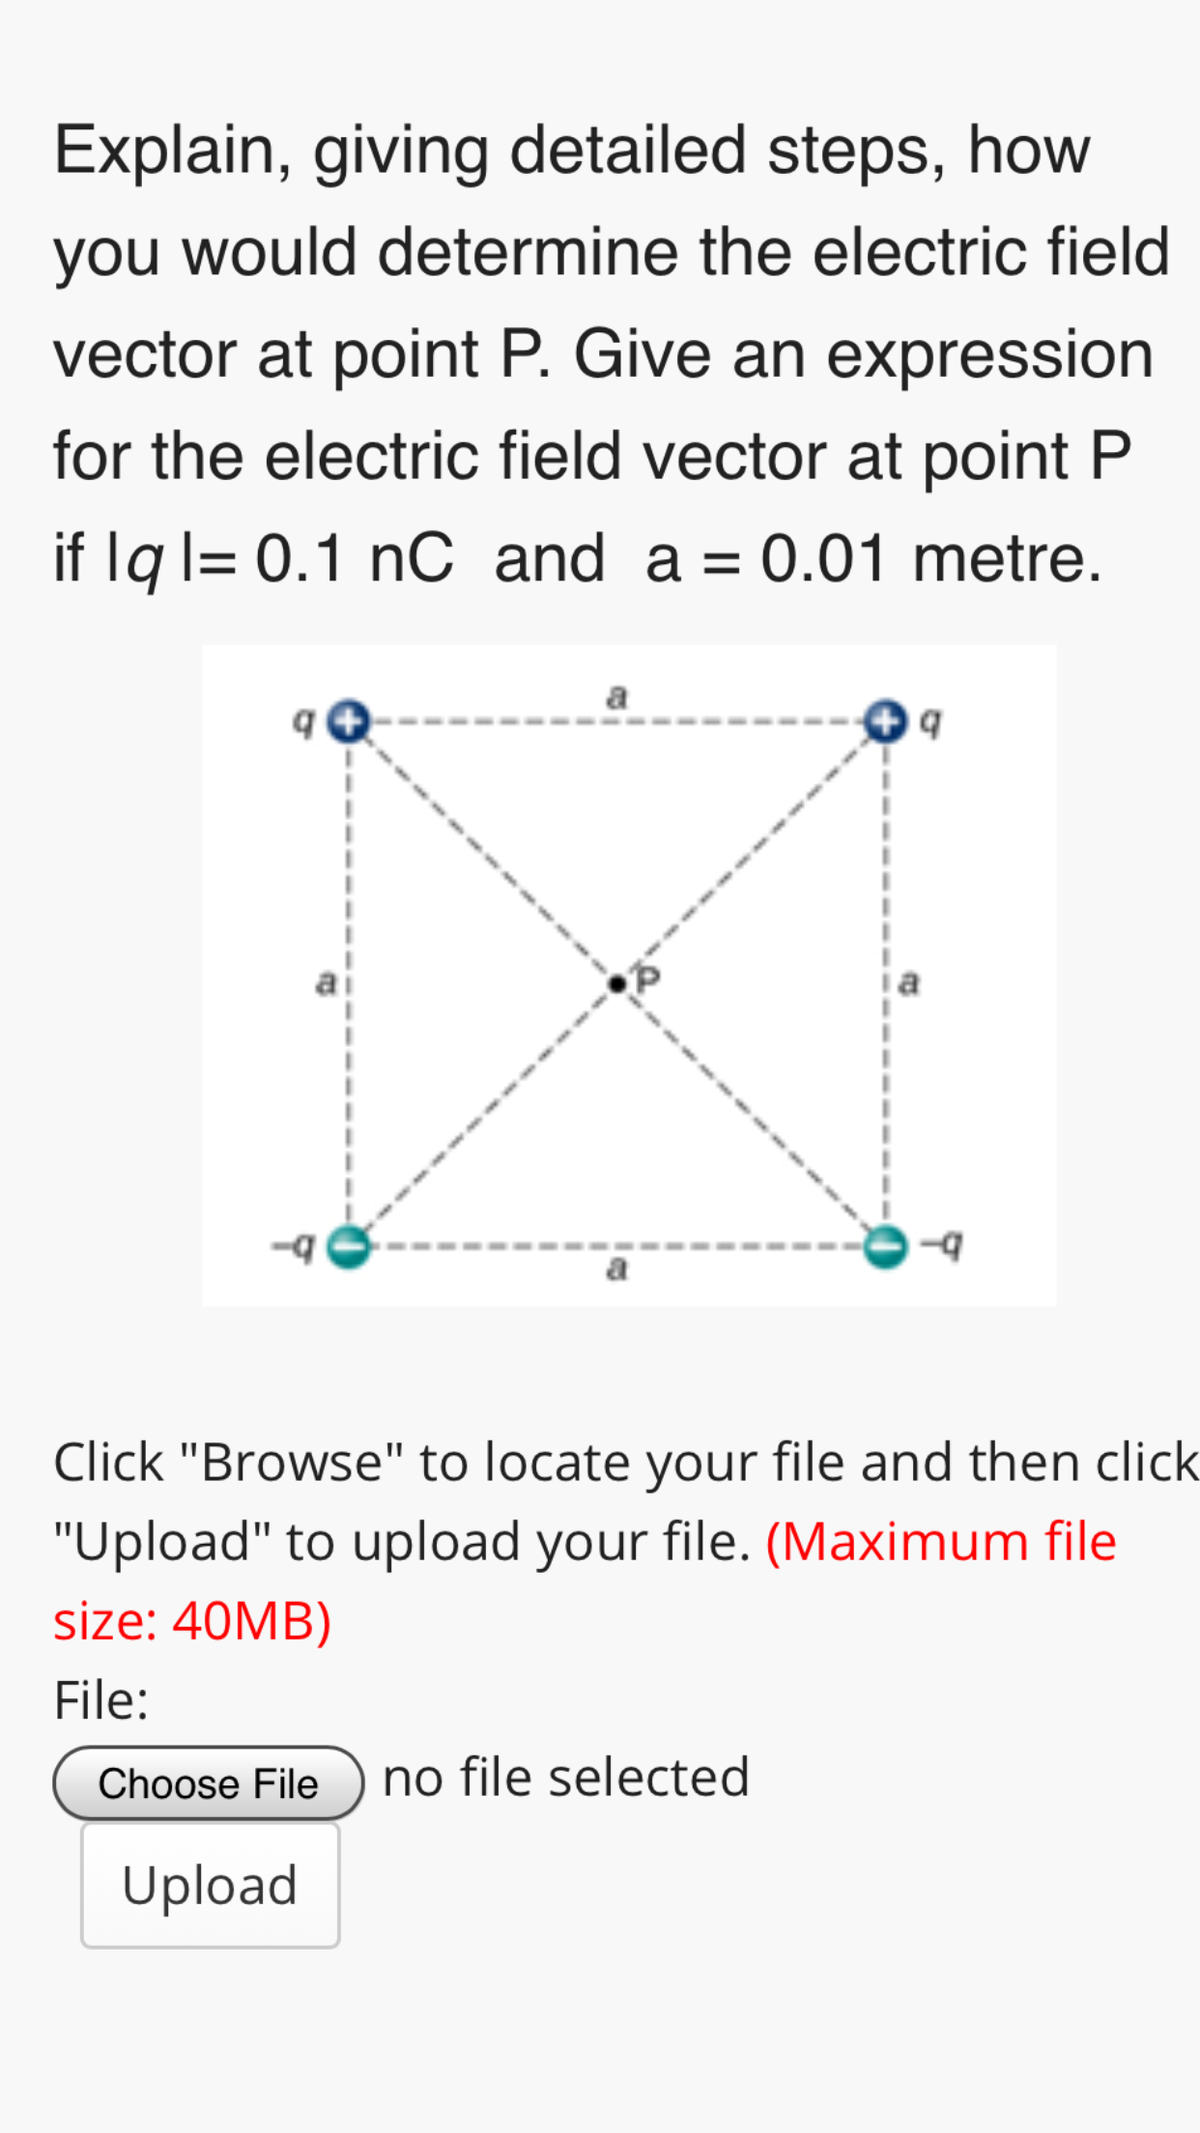 Explain, giving detailed steps, how
you would determine the electric field
vector at point P. Give an expression
for the electric field vector at point P
if lq l= 0.1 nC and a = 0.01 metre.
a
Click "Browse" to locate your file and then click
"Upload" to upload your file. (Maximum file
size: 40MB)
File:
Choose File
no file selected
Upload
